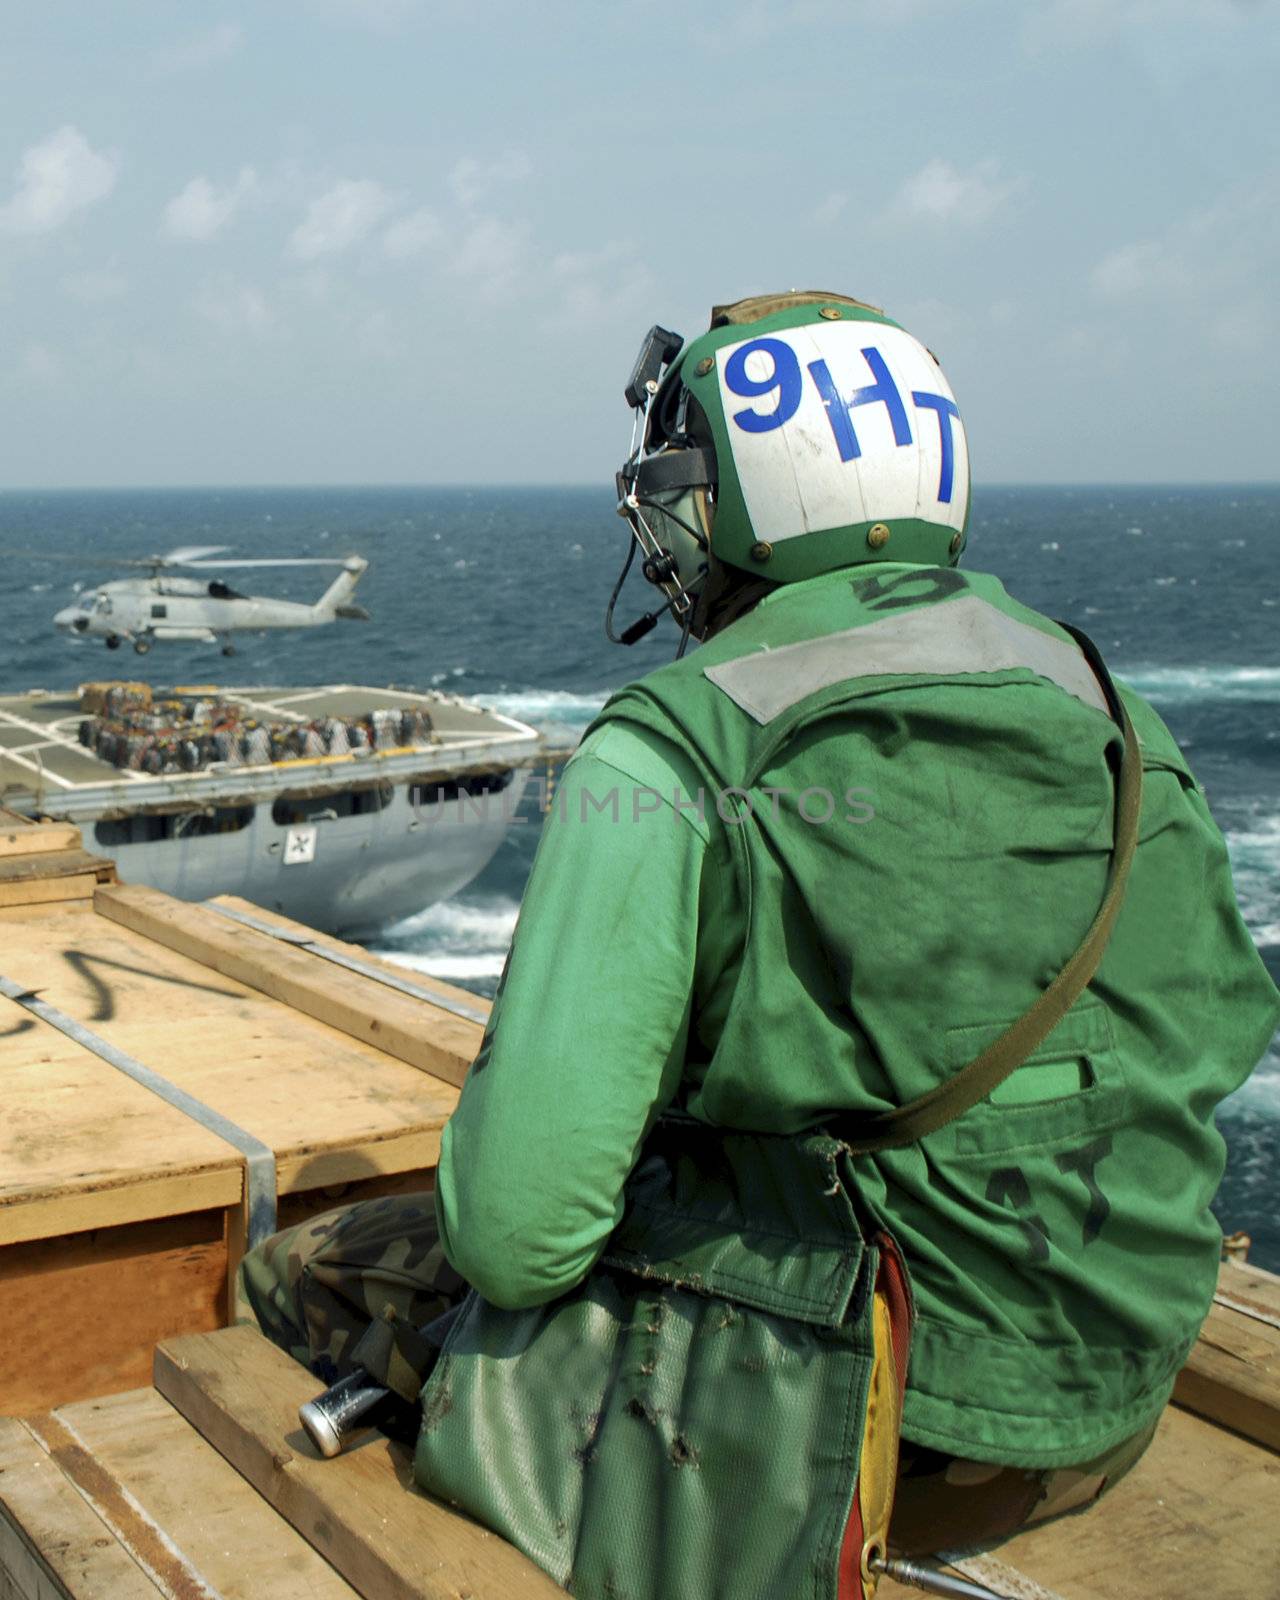 A sailor sits and watches a helicopter operate on a nearby ship